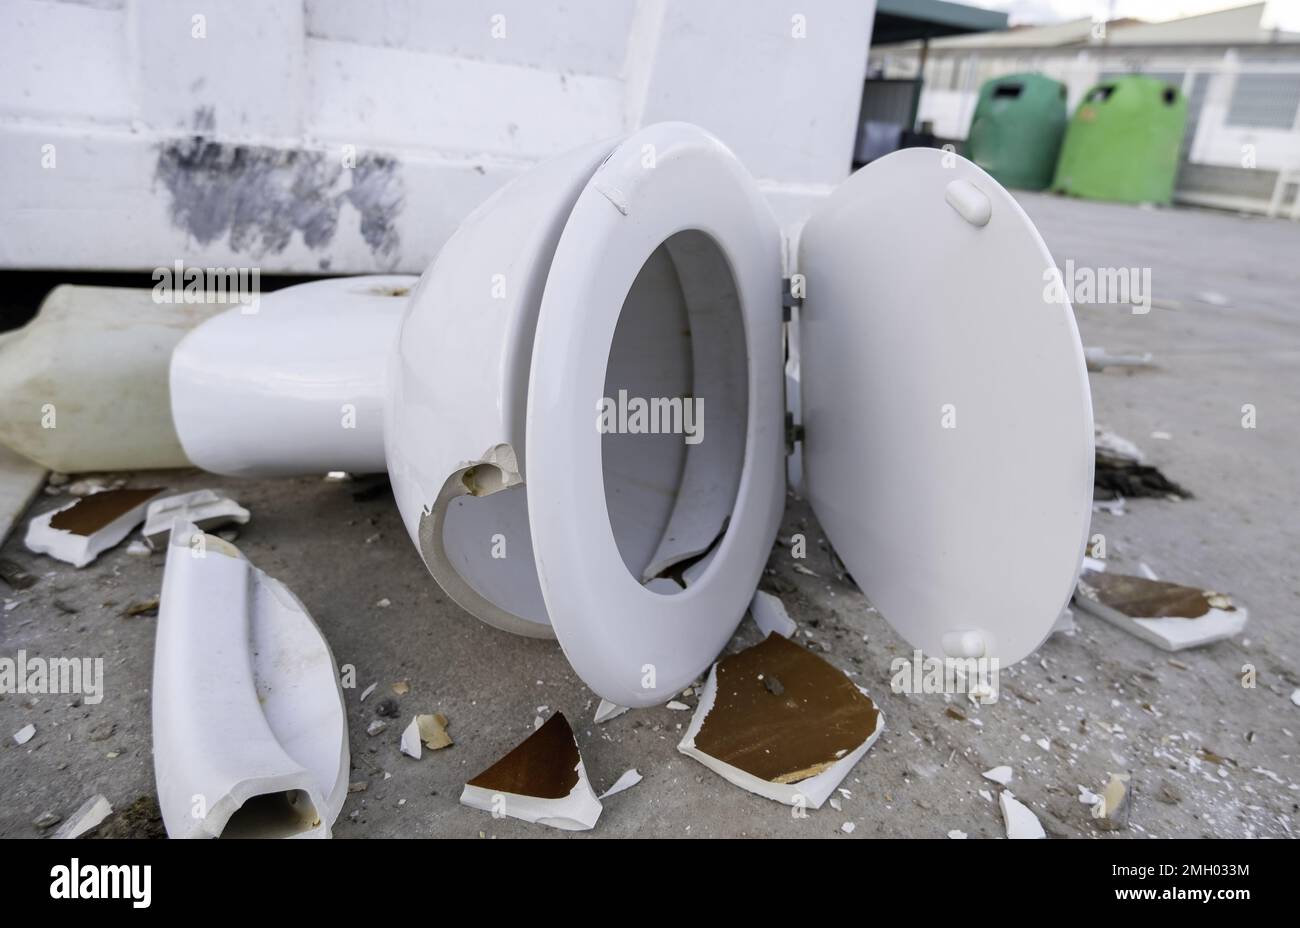 Detail of toilet in the garbage, destruction and vandalism in the street Stock Photo